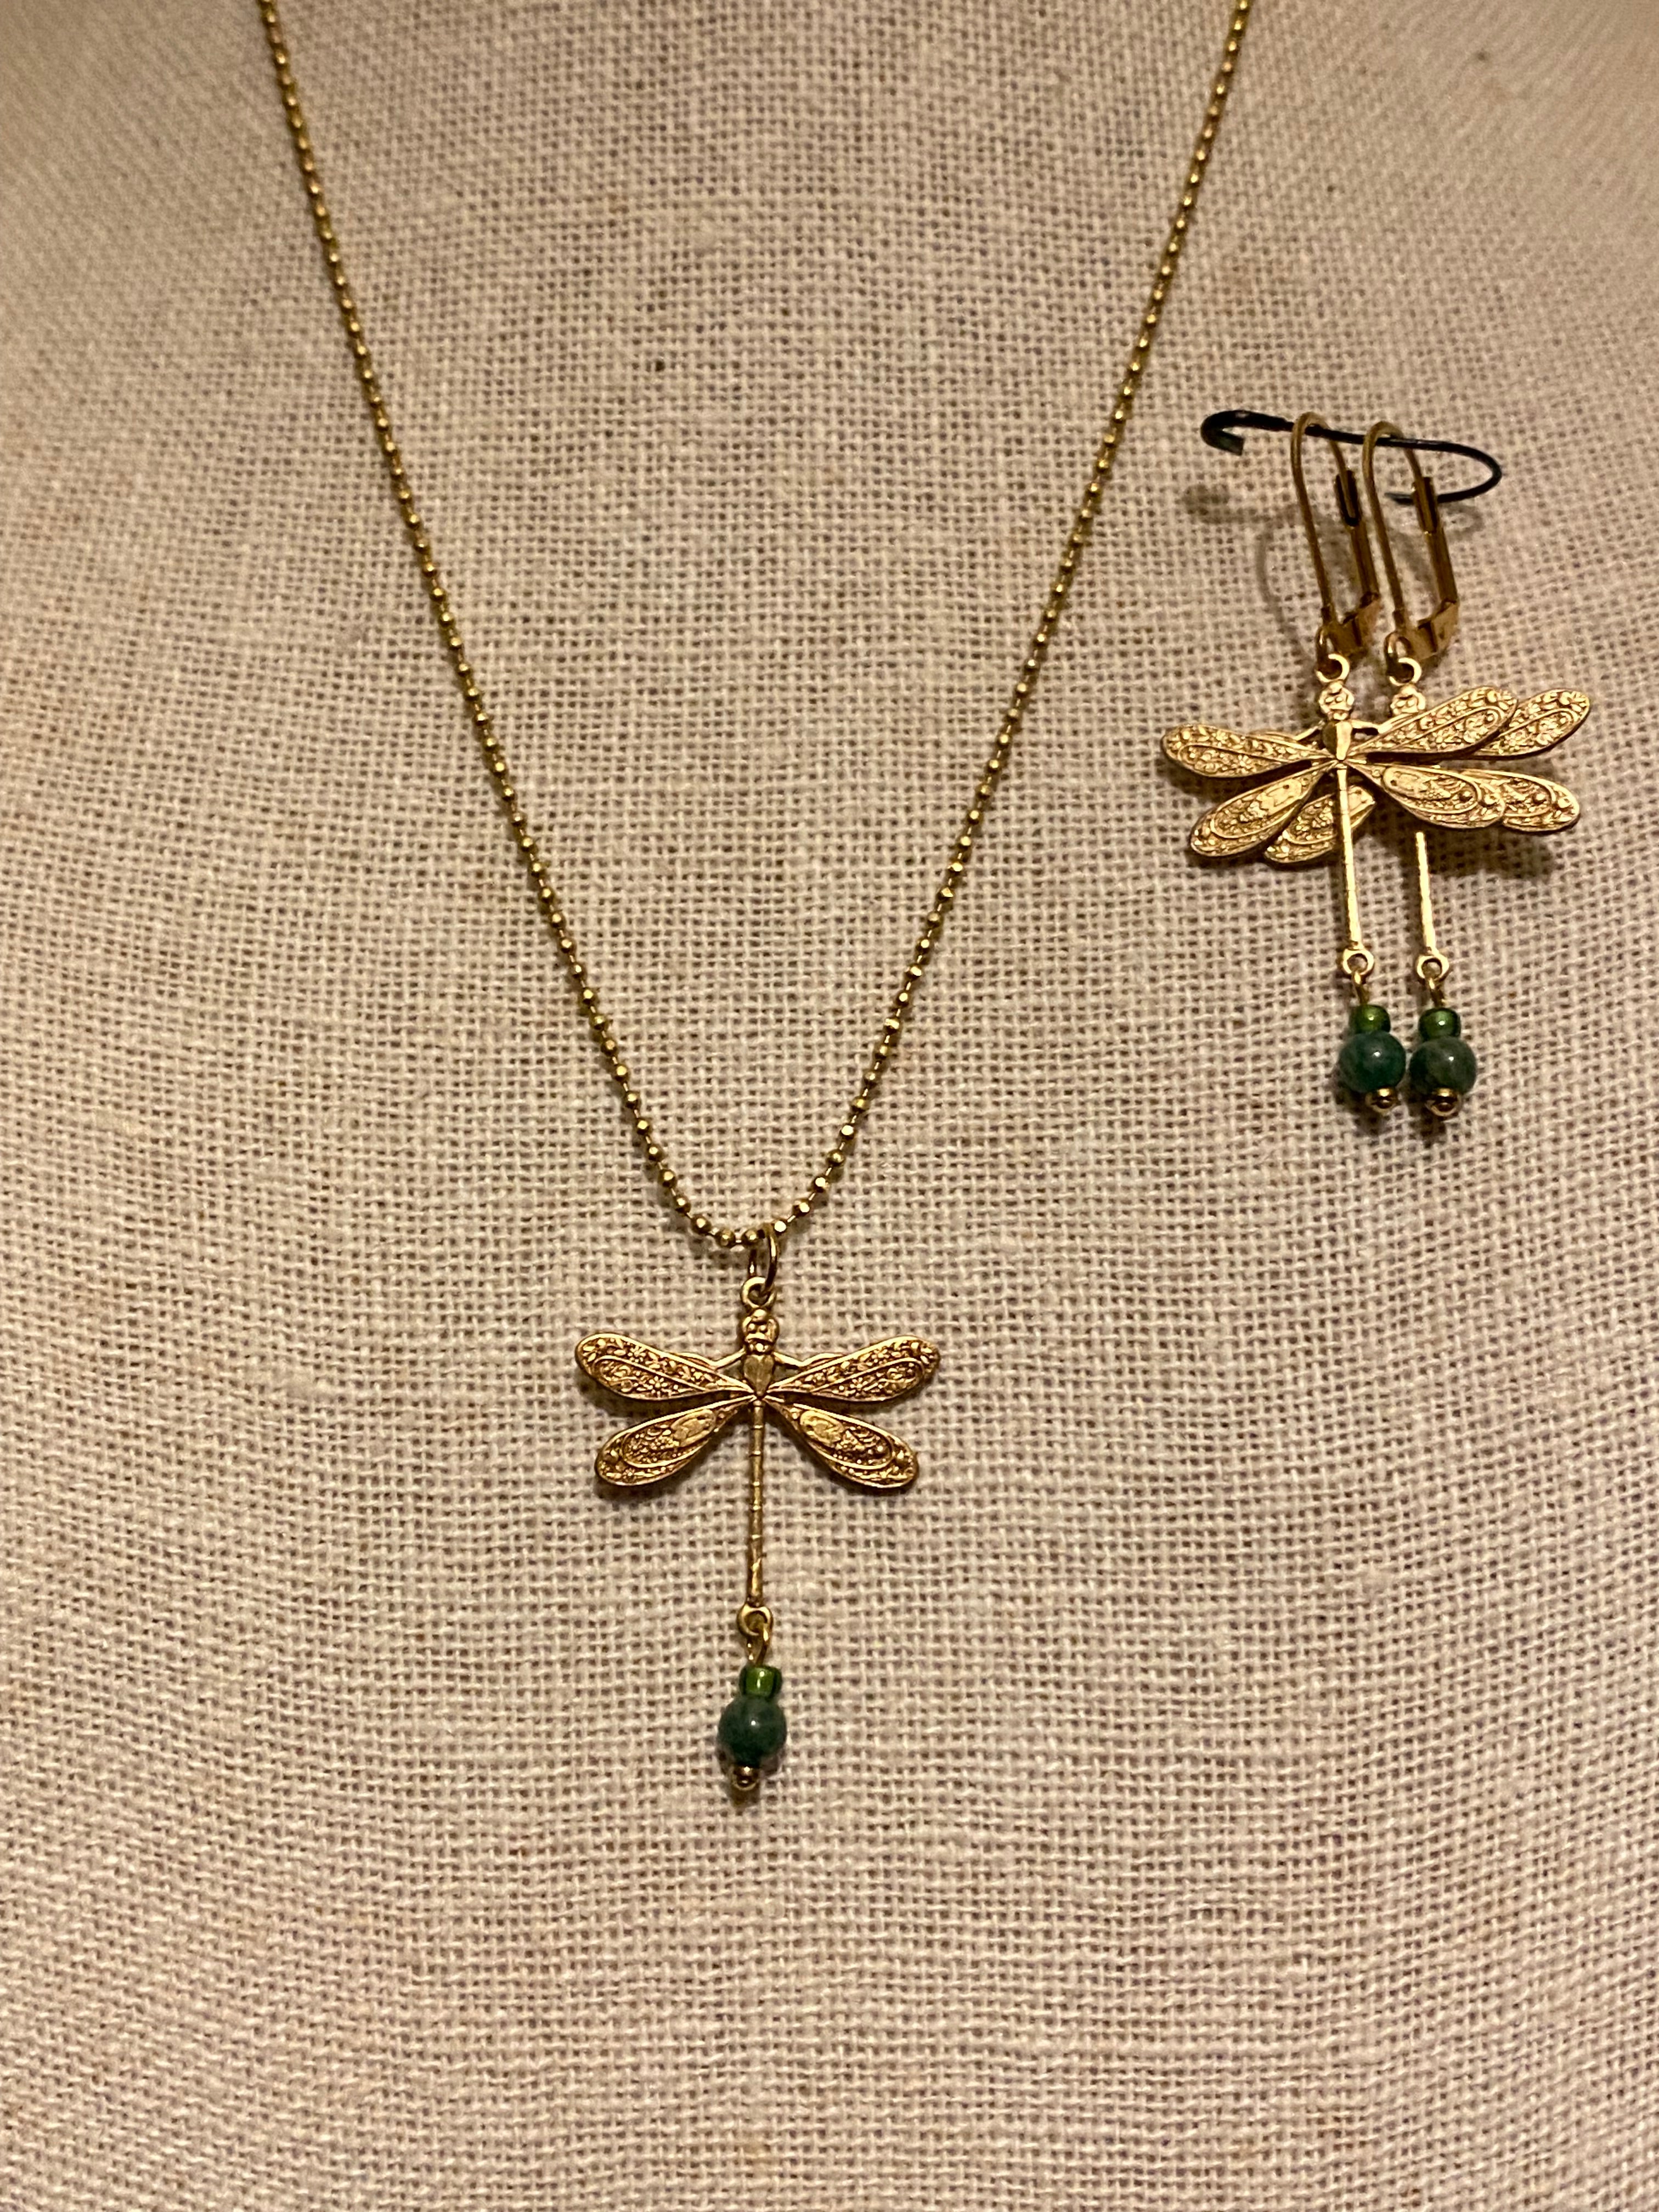 Dragonfly necklace green